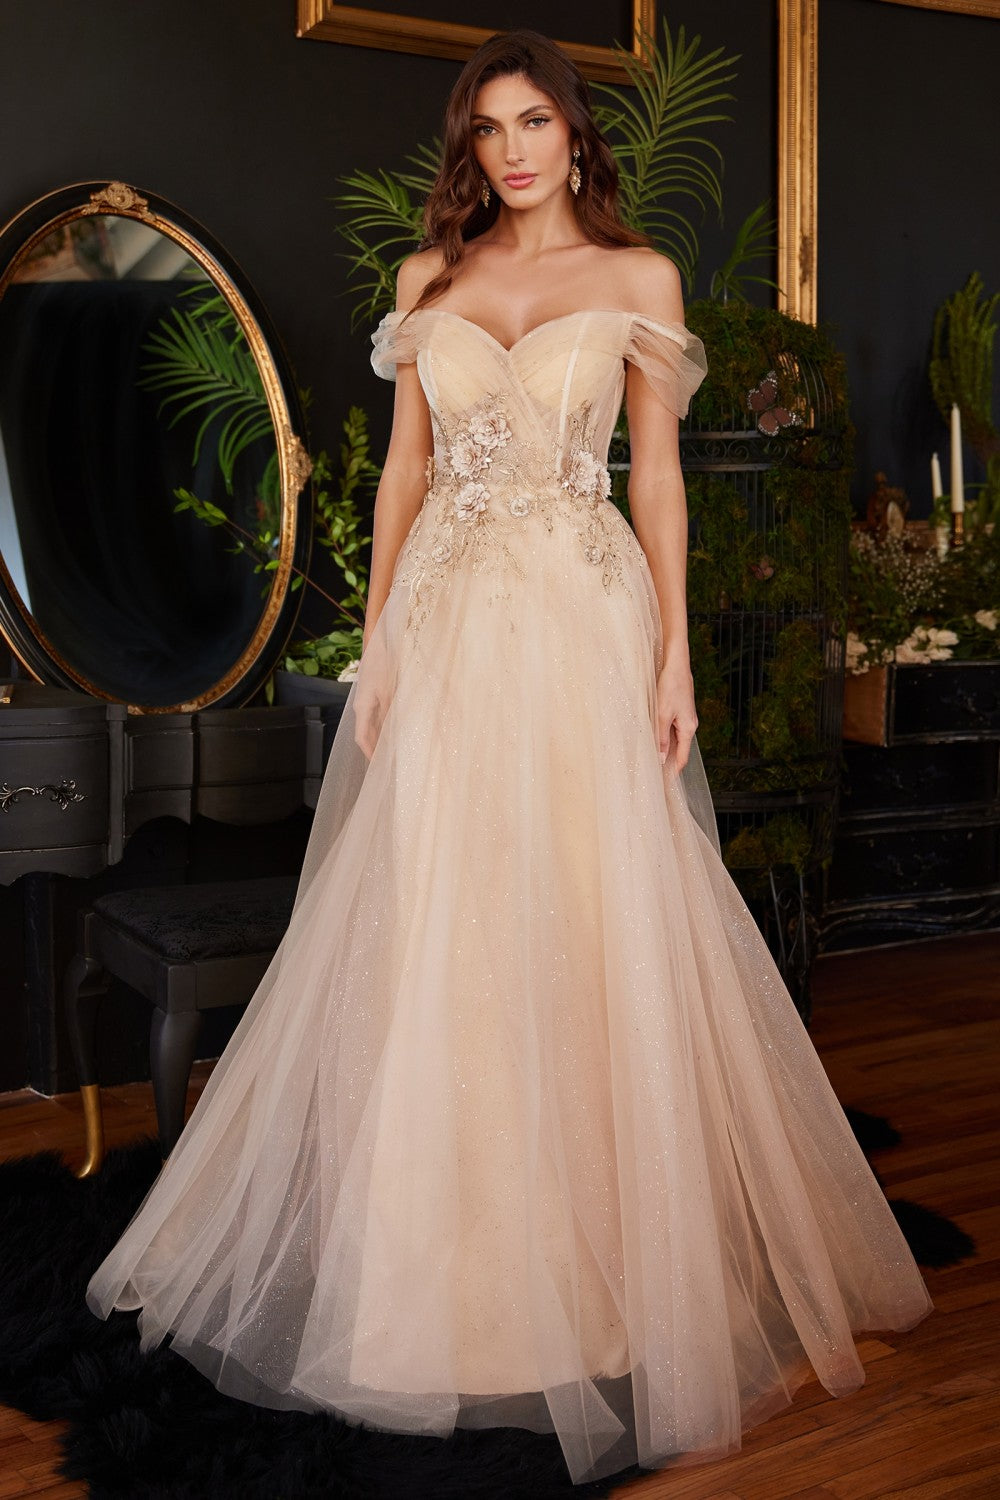 Look breathtaking in this 3D floral applique long off the shoulder dress with A-line glitter tulle skirt from Ladivine by Cinderella Divine CD3395.